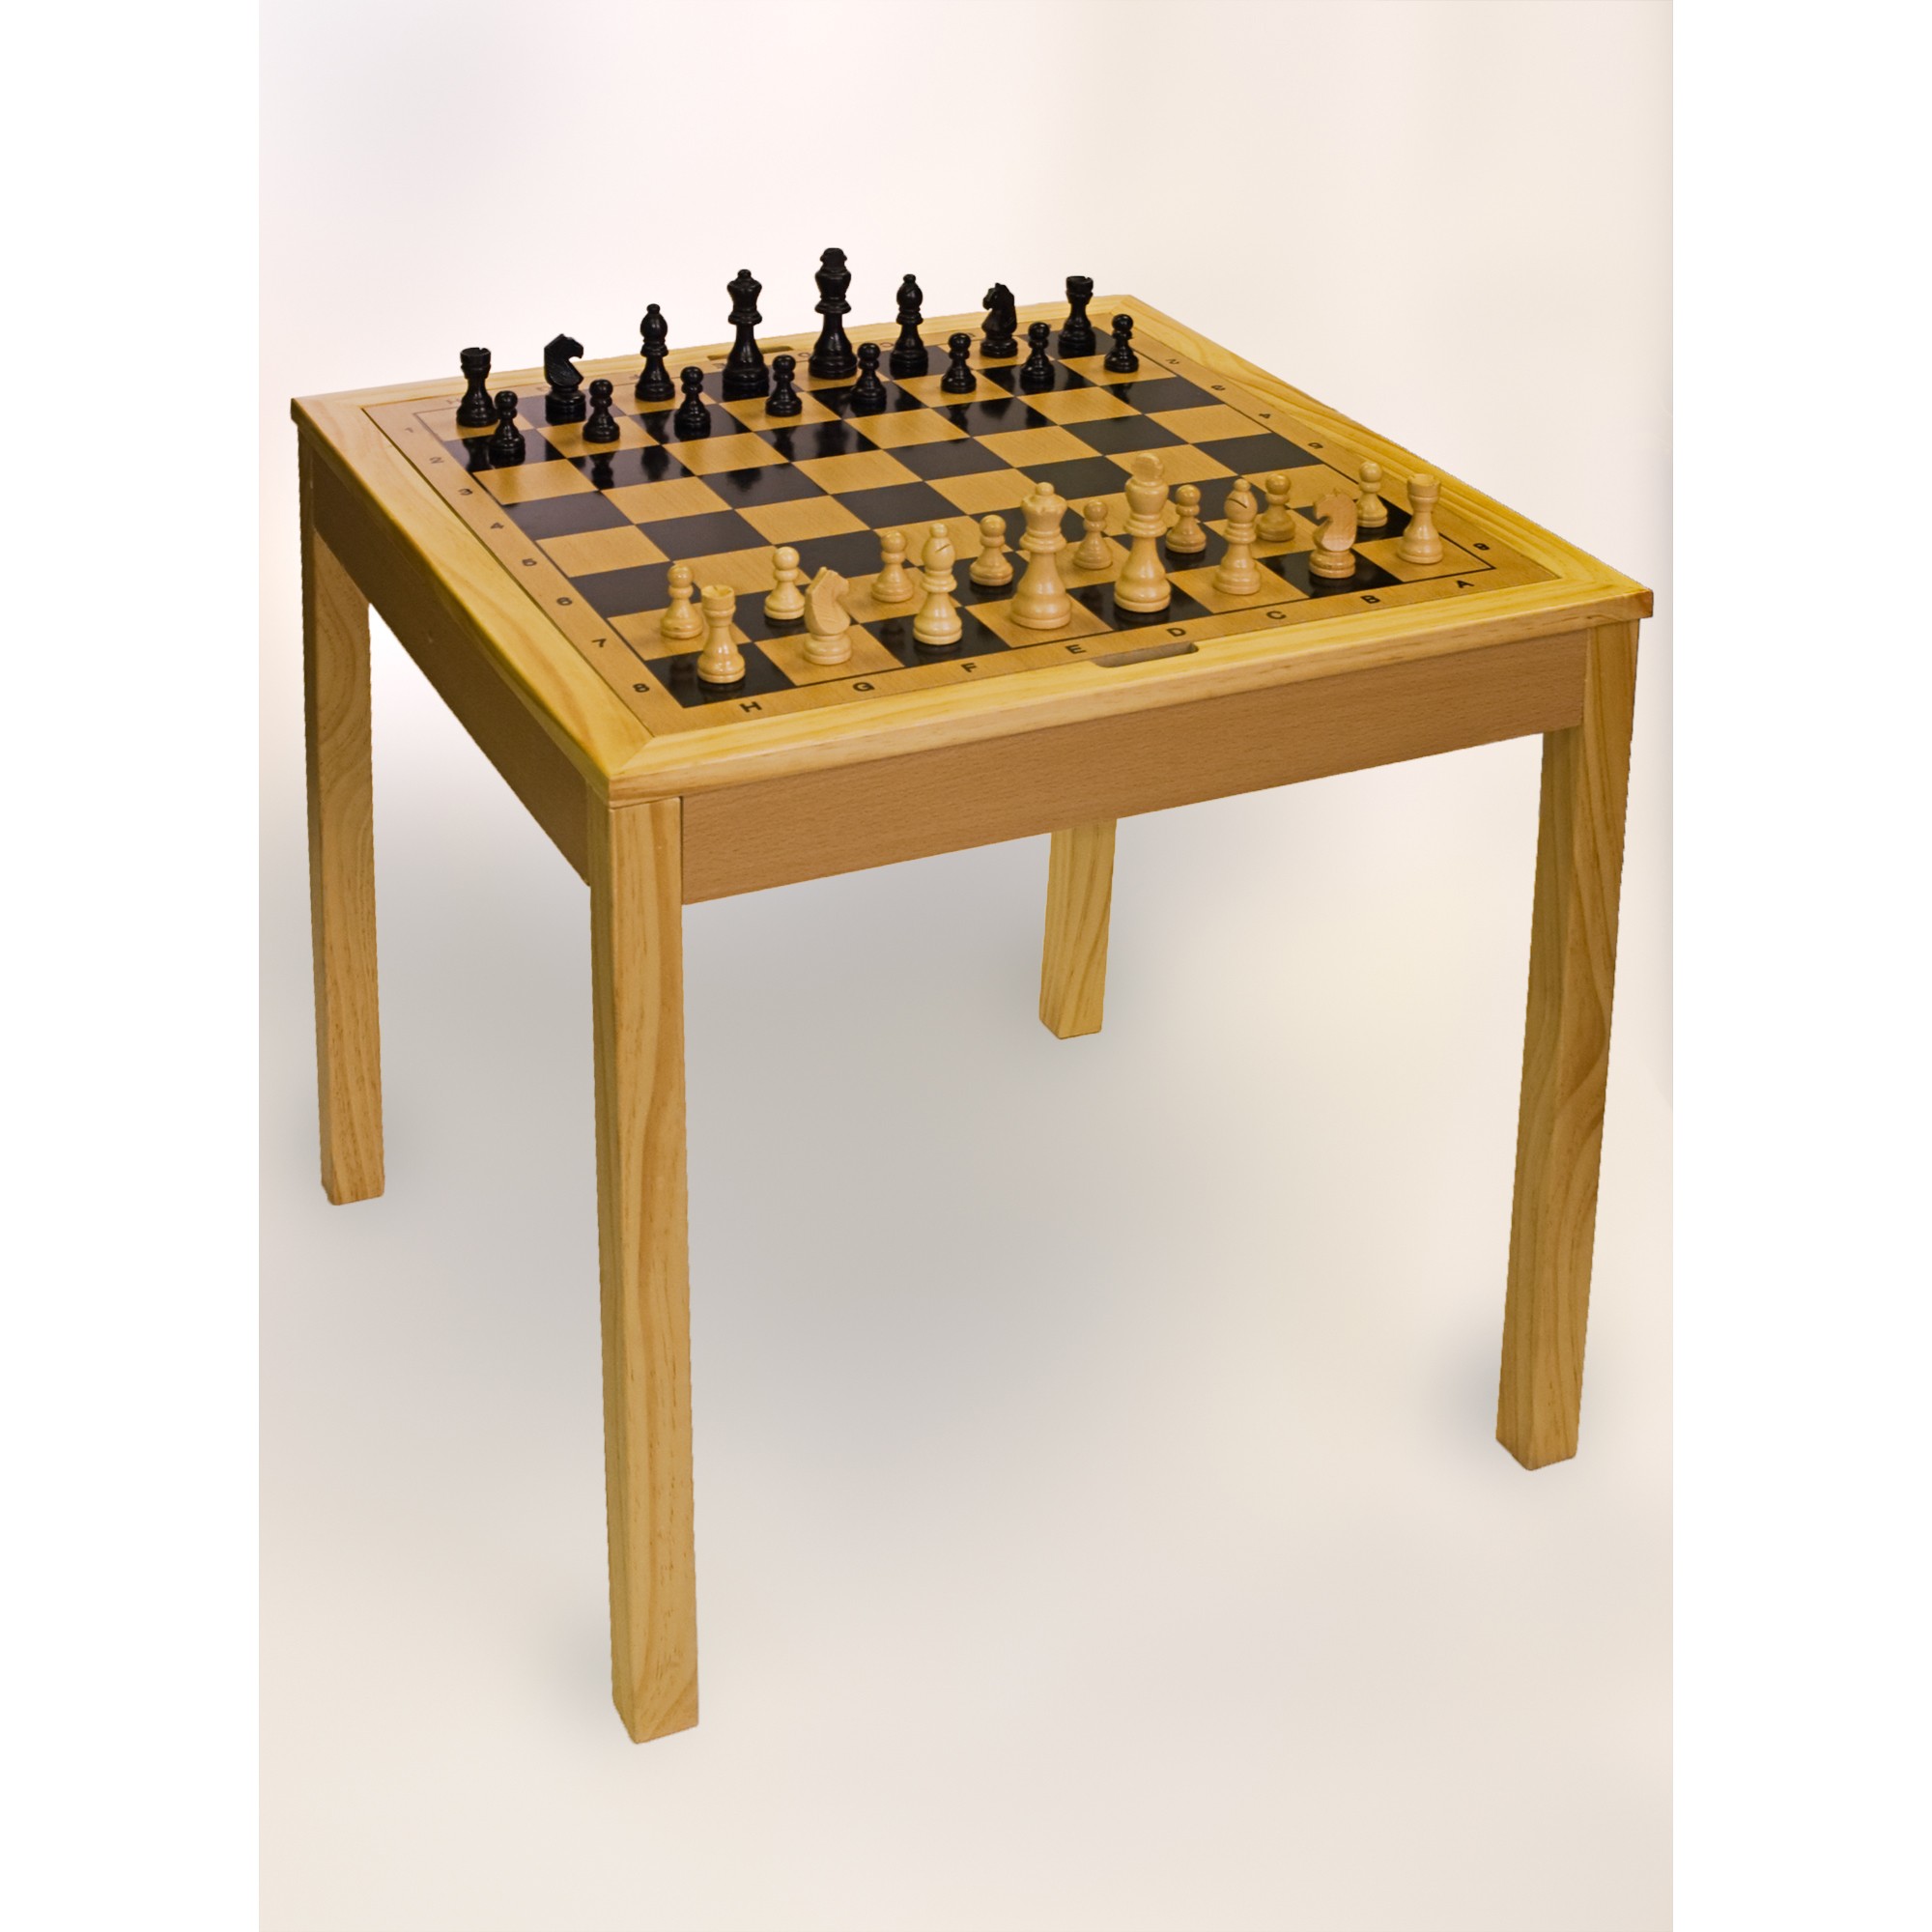 Wooden chess checkers and backgammon table sunnywood